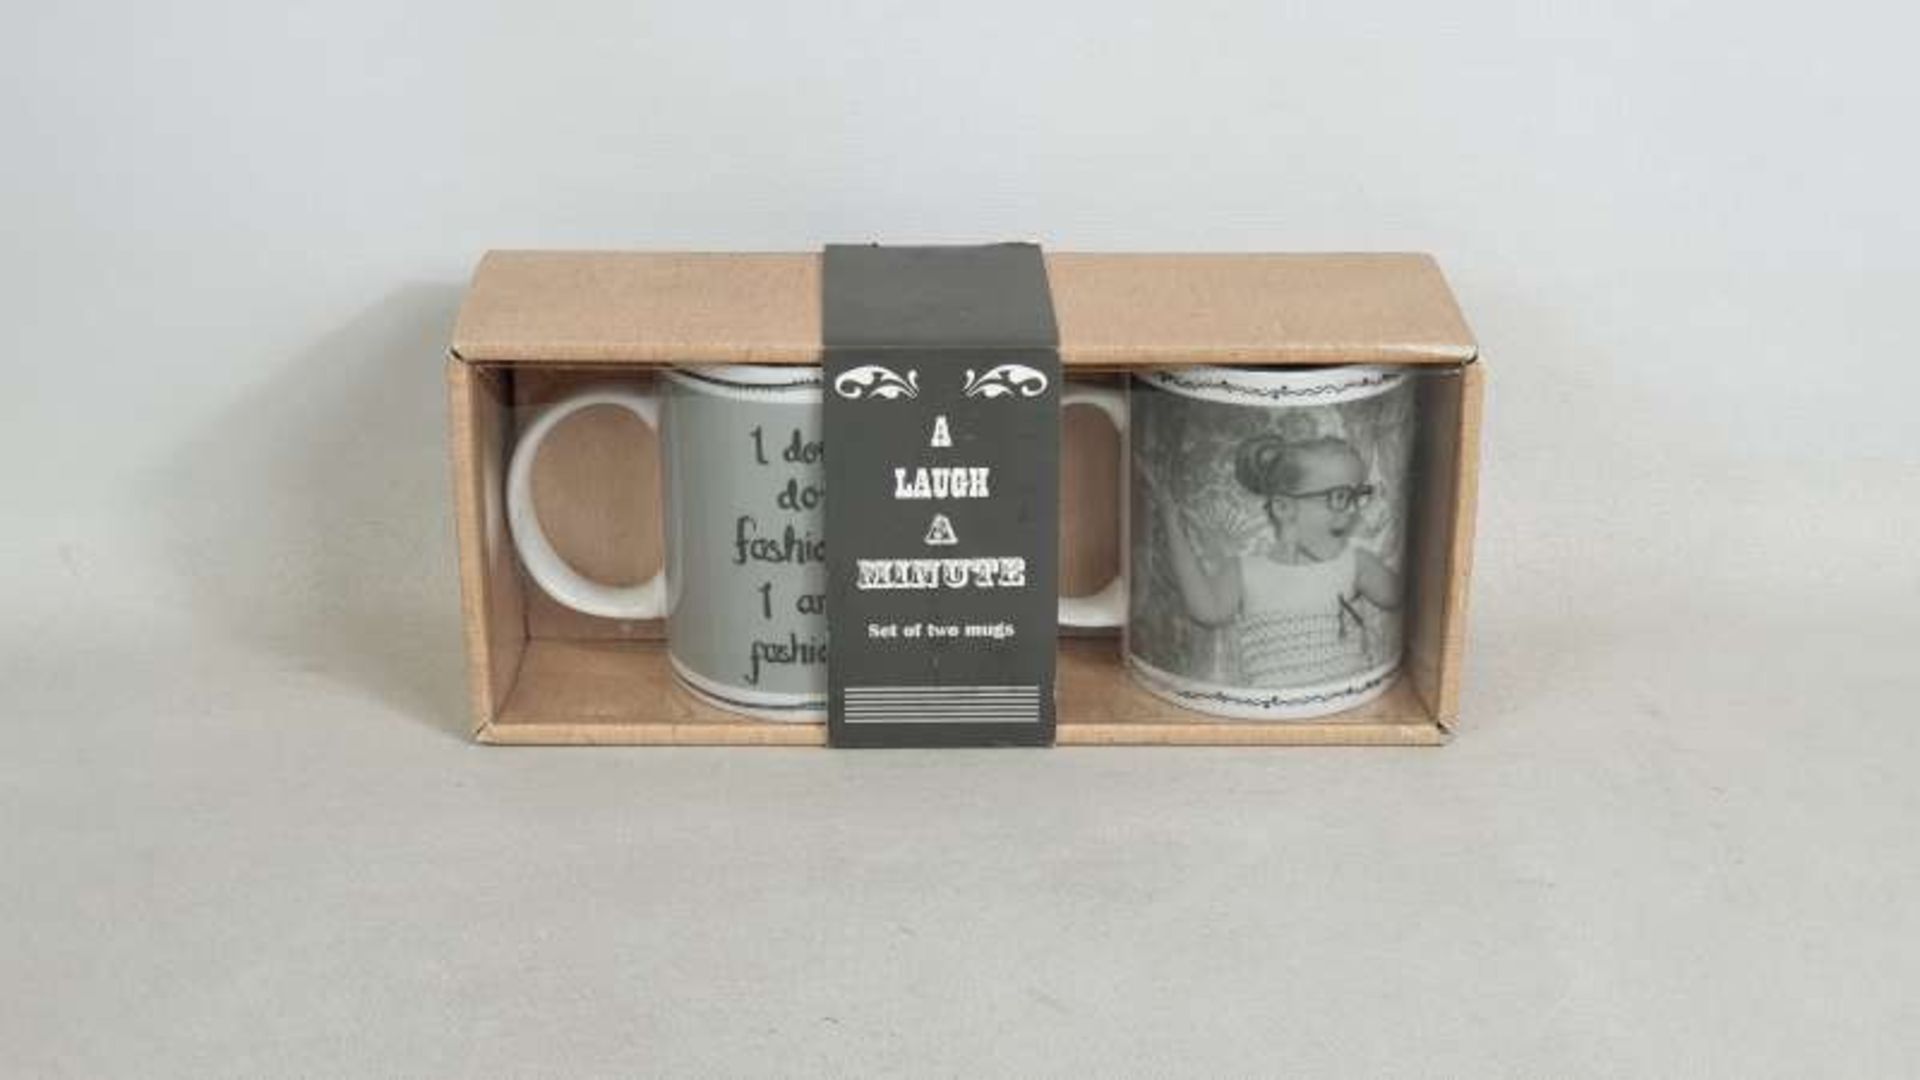 60 X SETS OF 2 MUGS IN 4 BOXES